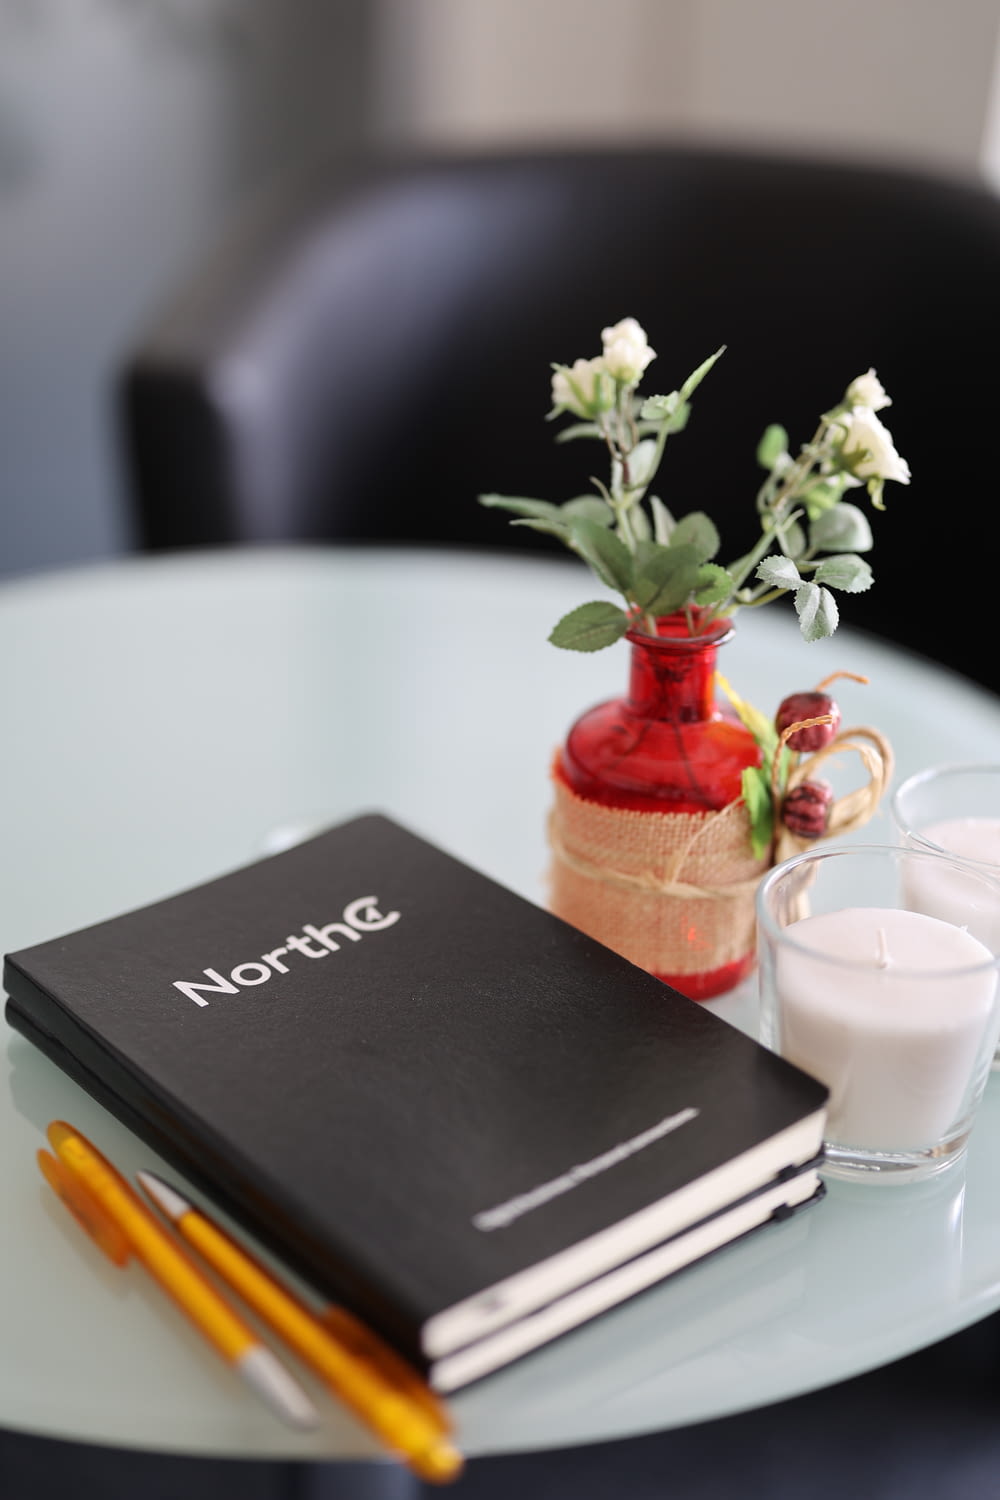 a table with a notebook, glass of milk and a vase with flowers on it